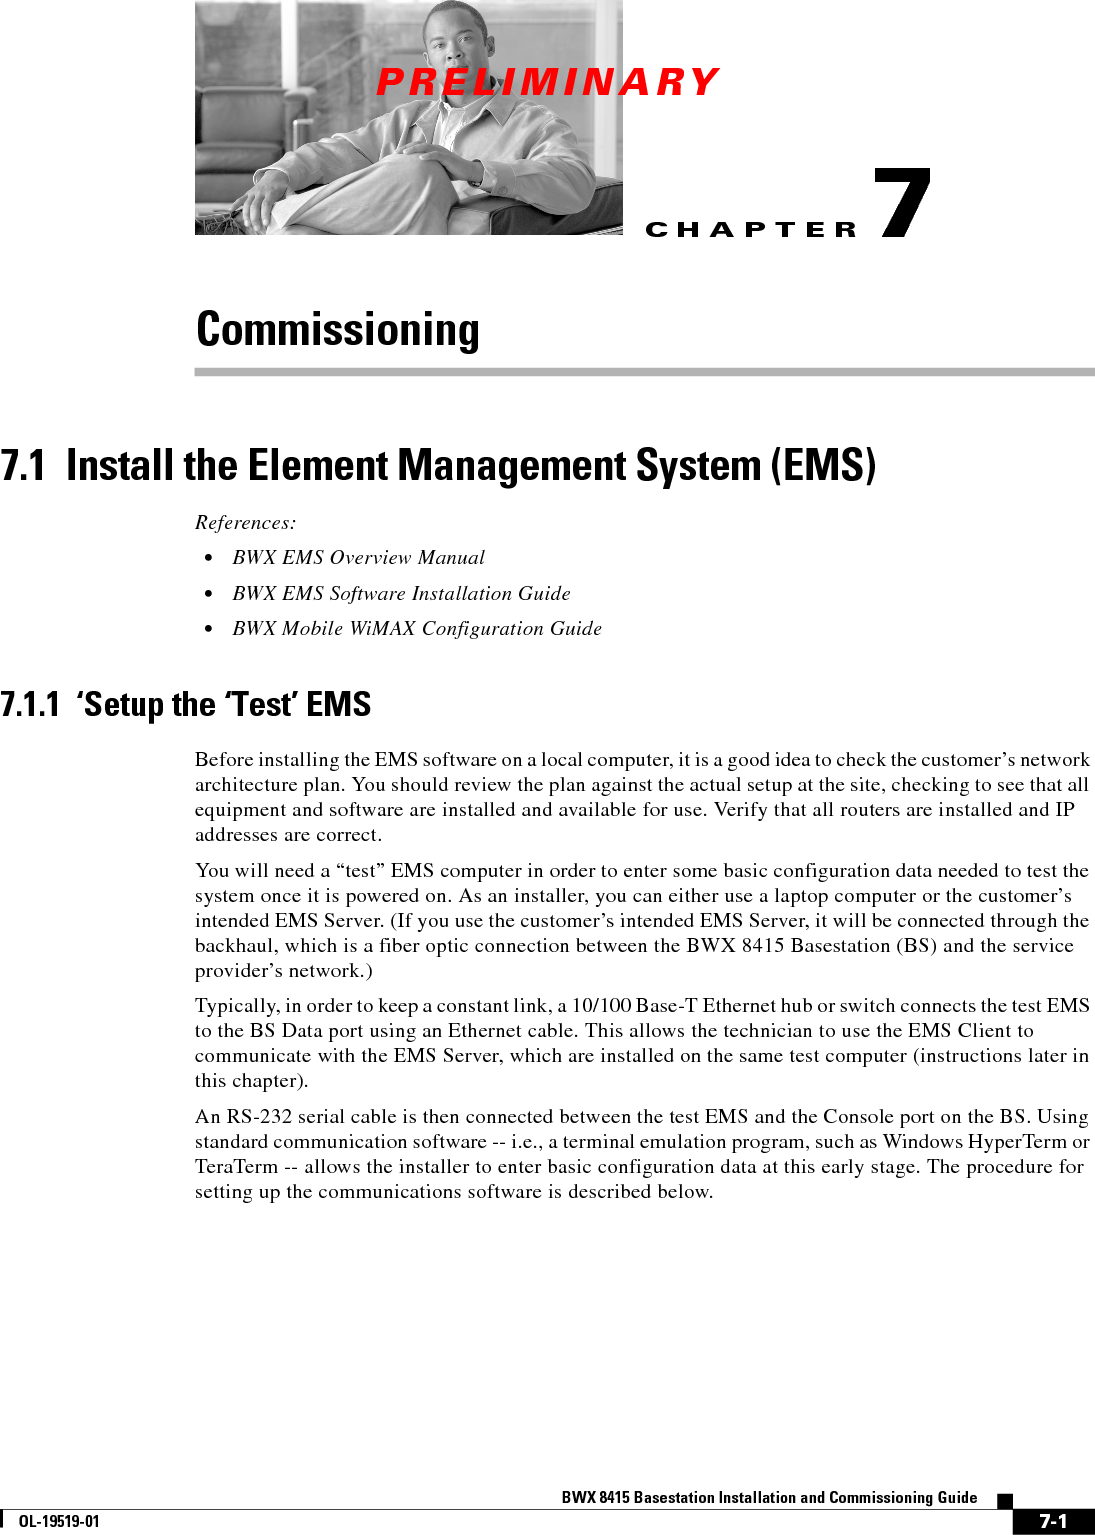 CHAPTERPRELIMINARY7-1BWX 8415 Basestation Installation and Commissioning GuideOL-19519-017Commissioning7.1  Install the Element Management System (EMS) References:  • BWX EMS Overview Manual  • BWX EMS Software Installation Guide  • BWX Mobile WiMAX Configuration Guide7.1.1  ‘Setup the ‘Test’ EMSBefore installing the EMS software on a local computer, it is a good idea to check the customer’s network architecture plan. You should review the plan against the actual setup at the site, checking to see that all equipment and software are installed and available for use. Verify that all routers are installed and IP addresses are correct.You will need a “test” EMS computer in order to enter some basic configuration data needed to test the system once it is powered on. As an installer, you can either use a laptop computer or the customer’s intended EMS Server. (If you use the customer’s intended EMS Server, it will be connected through the backhaul, which is a fiber optic connection between the BWX 8415 Basestation (BS) and the service provider’s network.) Typically, in order to keep a constant link, a 10/100 Base-T Ethernet hub or switch connects the test EMS to the BS Data port using an Ethernet cable. This allows the technician to use the EMS Client to communicate with the EMS Server, which are installed on the same test computer (instructions later in this chapter).An RS-232 serial cable is then connected between the test EMS and the Console port on the BS. Using standard communication software -- i.e., a terminal emulation program, such as Windows HyperTerm or TeraTerm -- allows the installer to enter basic configuration data at this early stage. The procedure for setting up the communications software is described below.